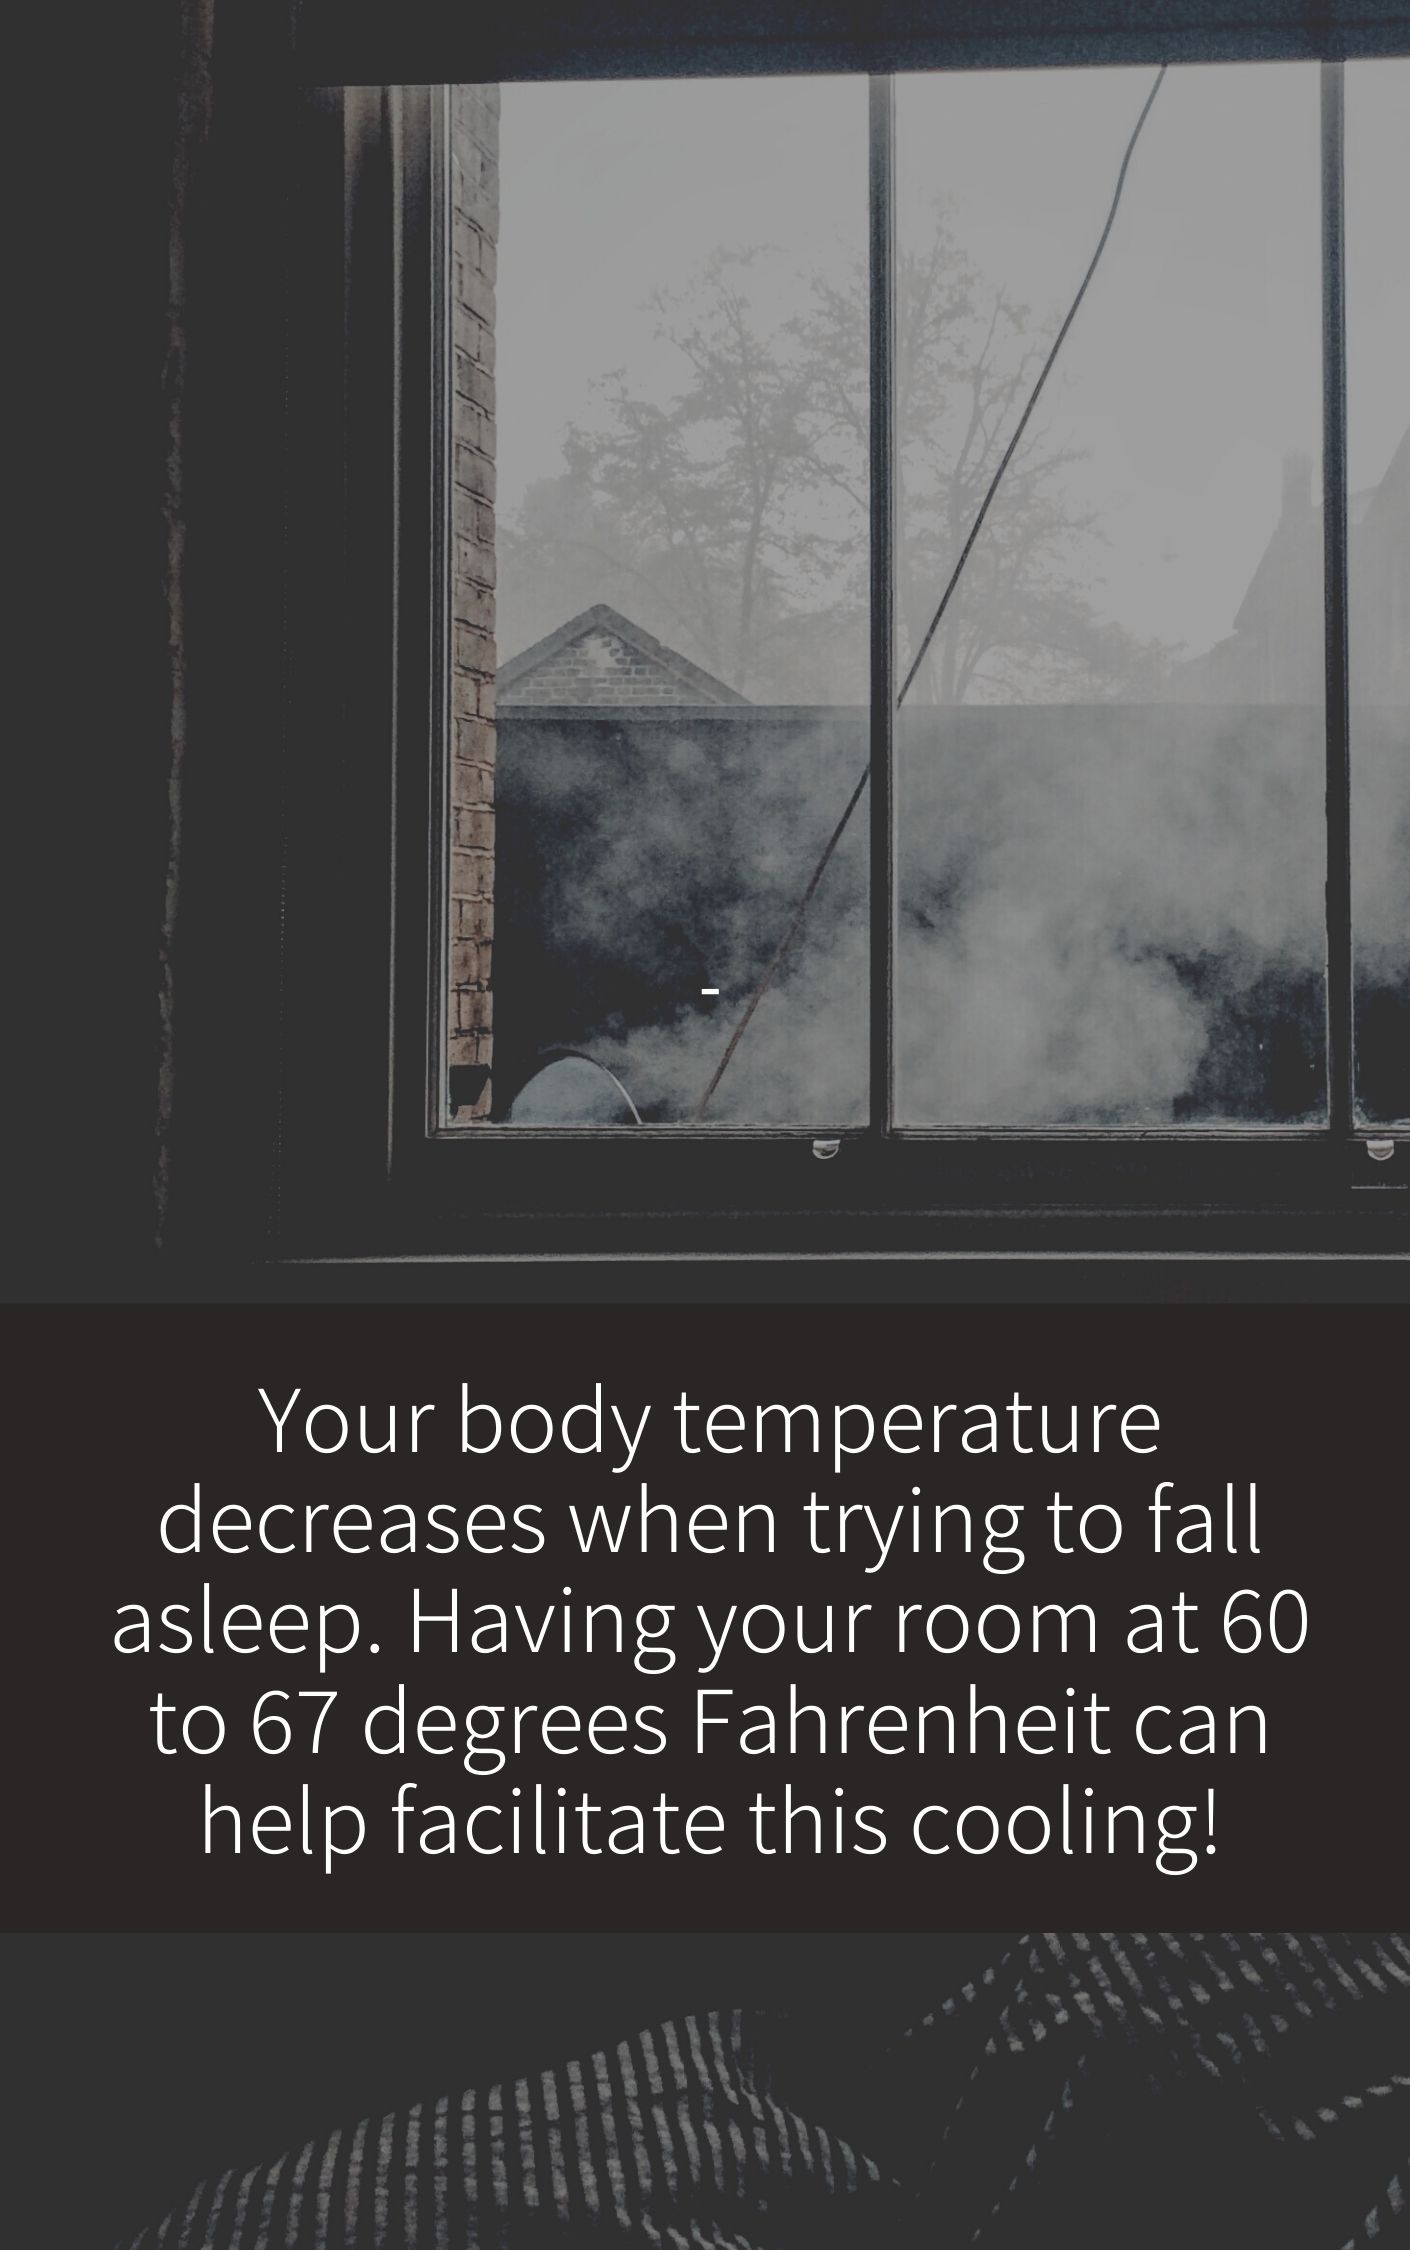 Your body temperature decreases when trying to fall asleep. Having your room at 60 to 67 degrees Fahrenheit can help facilitate this cooling!